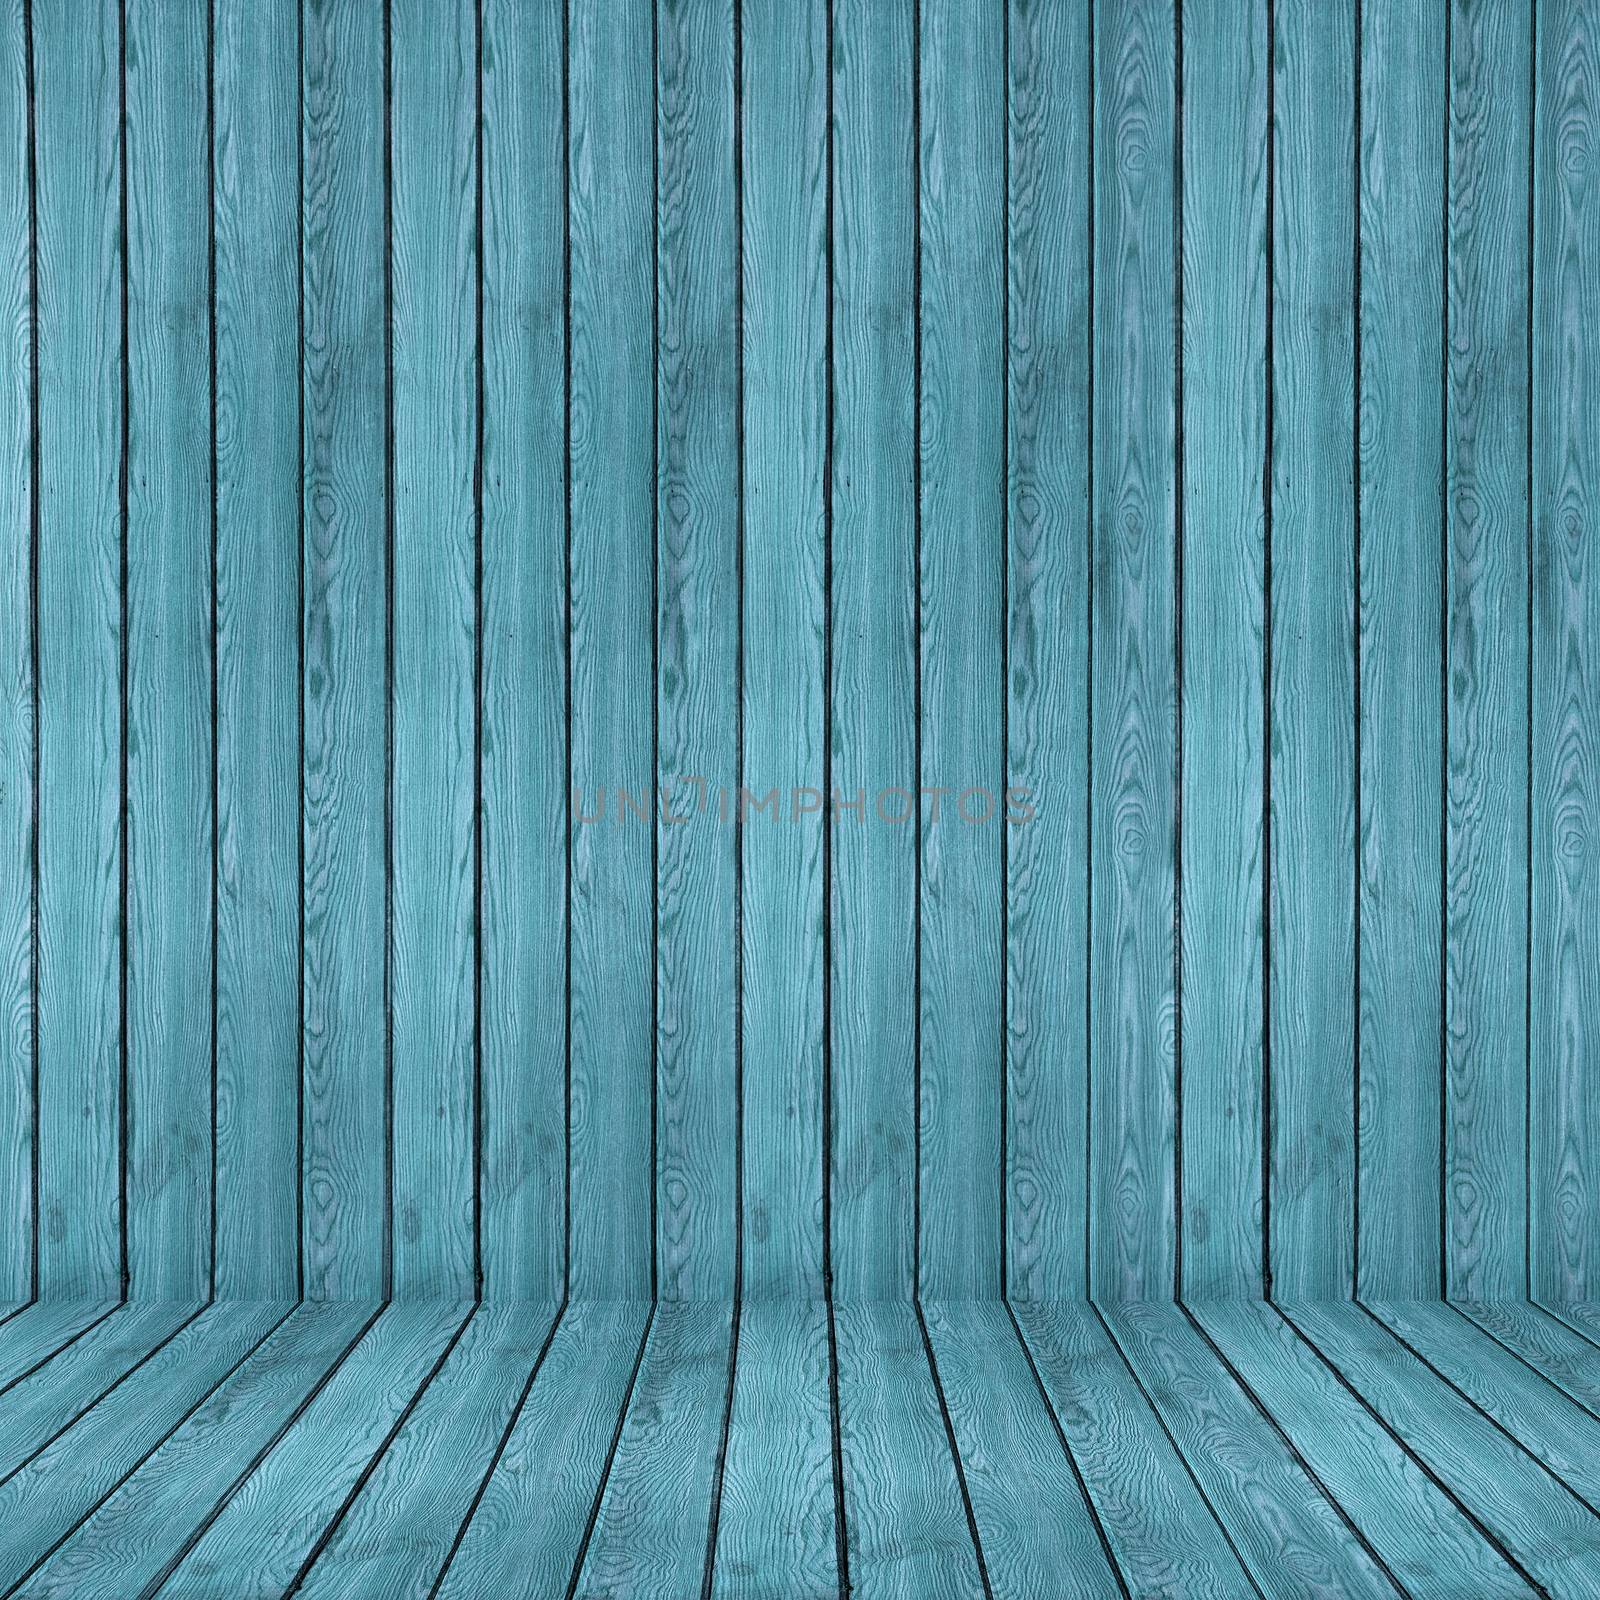 Wood texture background. blue wood wall and floor.